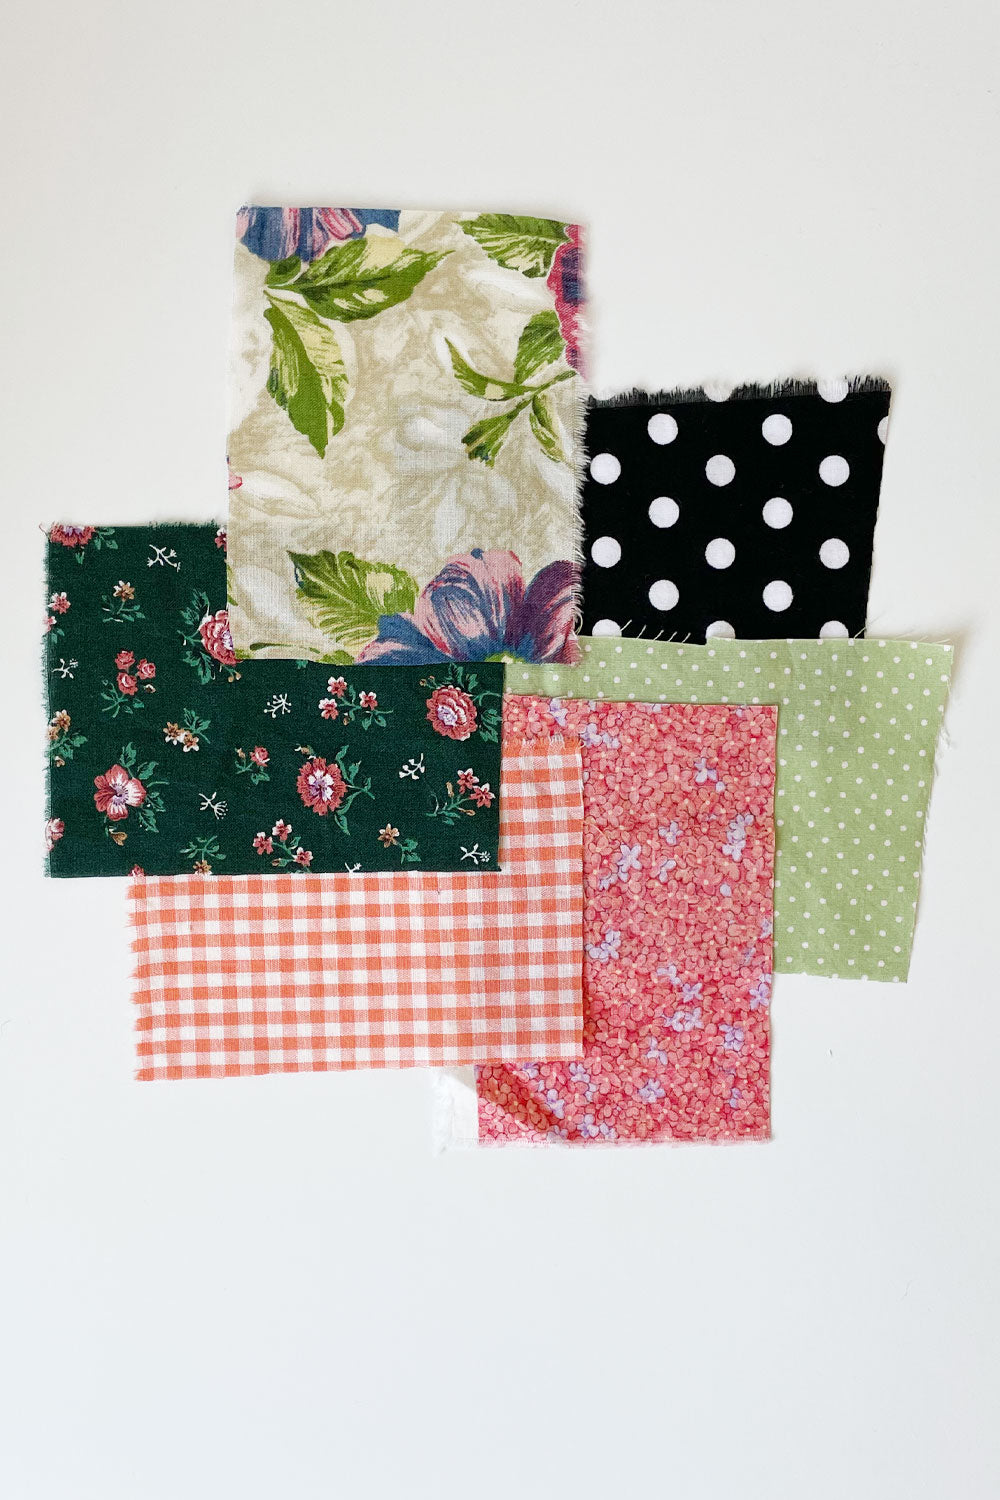 6 small fabric swatches mainly in shades of pink, green, and black/white polka dot..